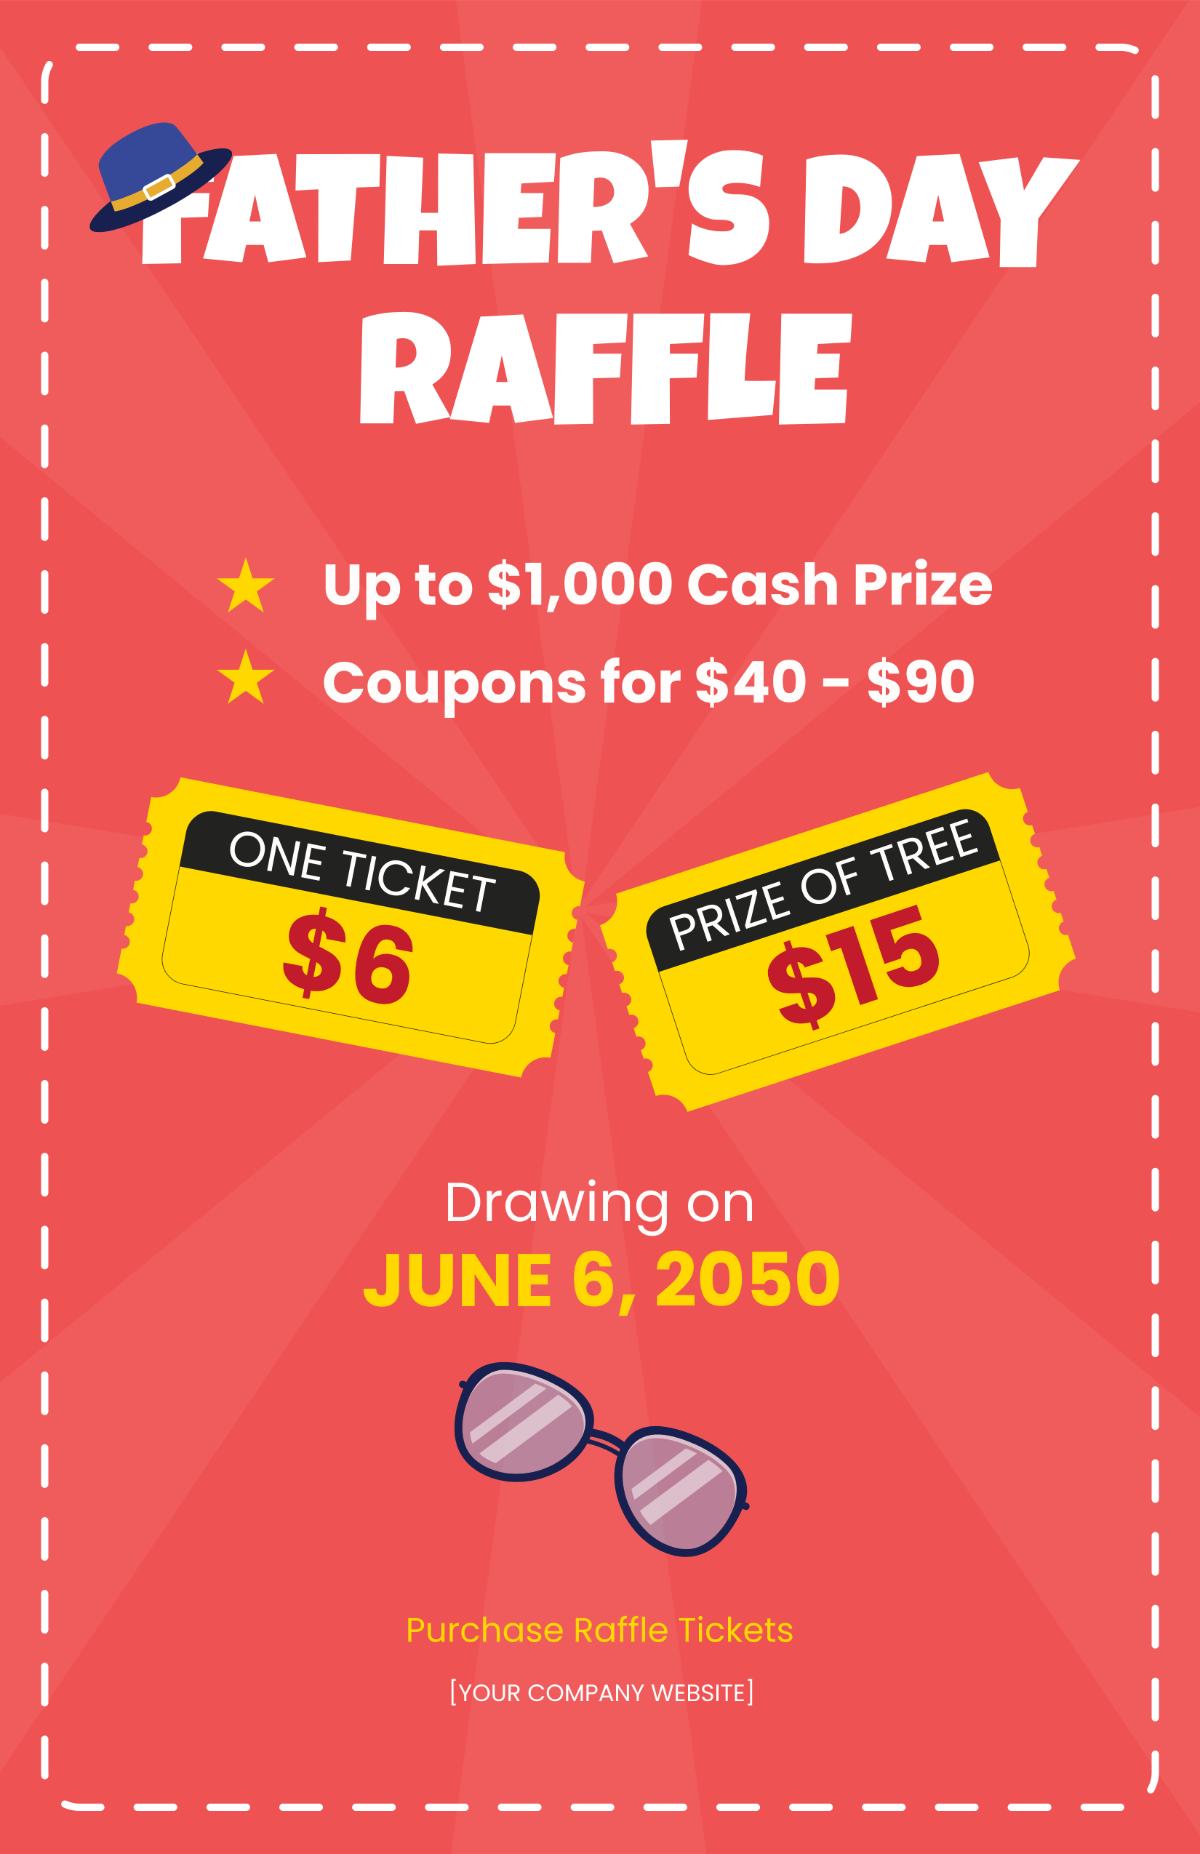 Father's Day Raffle Poster